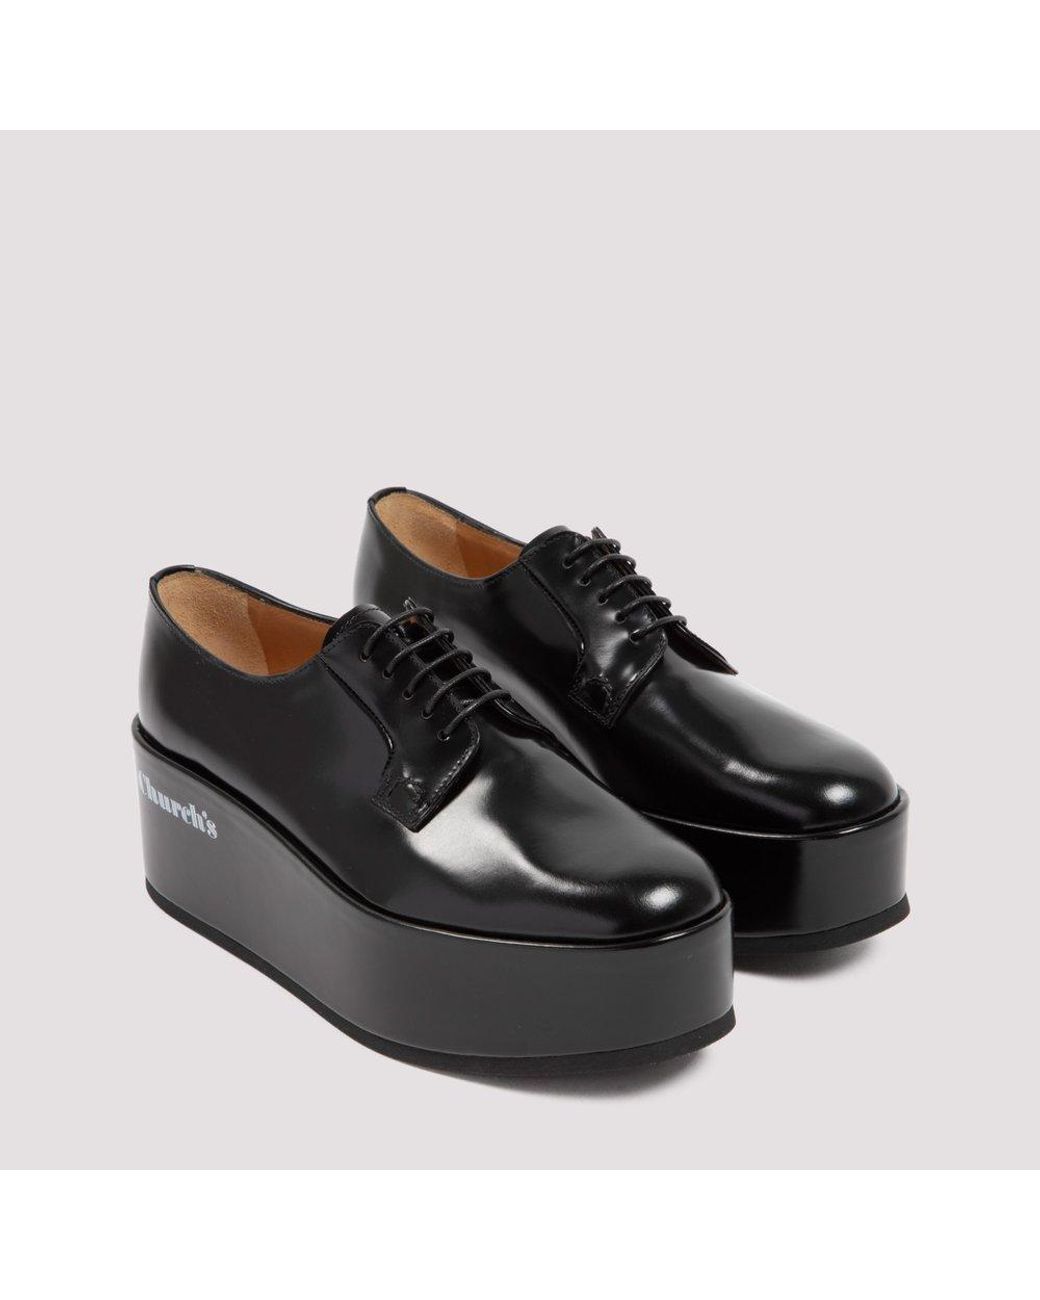 Church's Leather Shannon Round Toe Derby Shoes in Black - Lyst